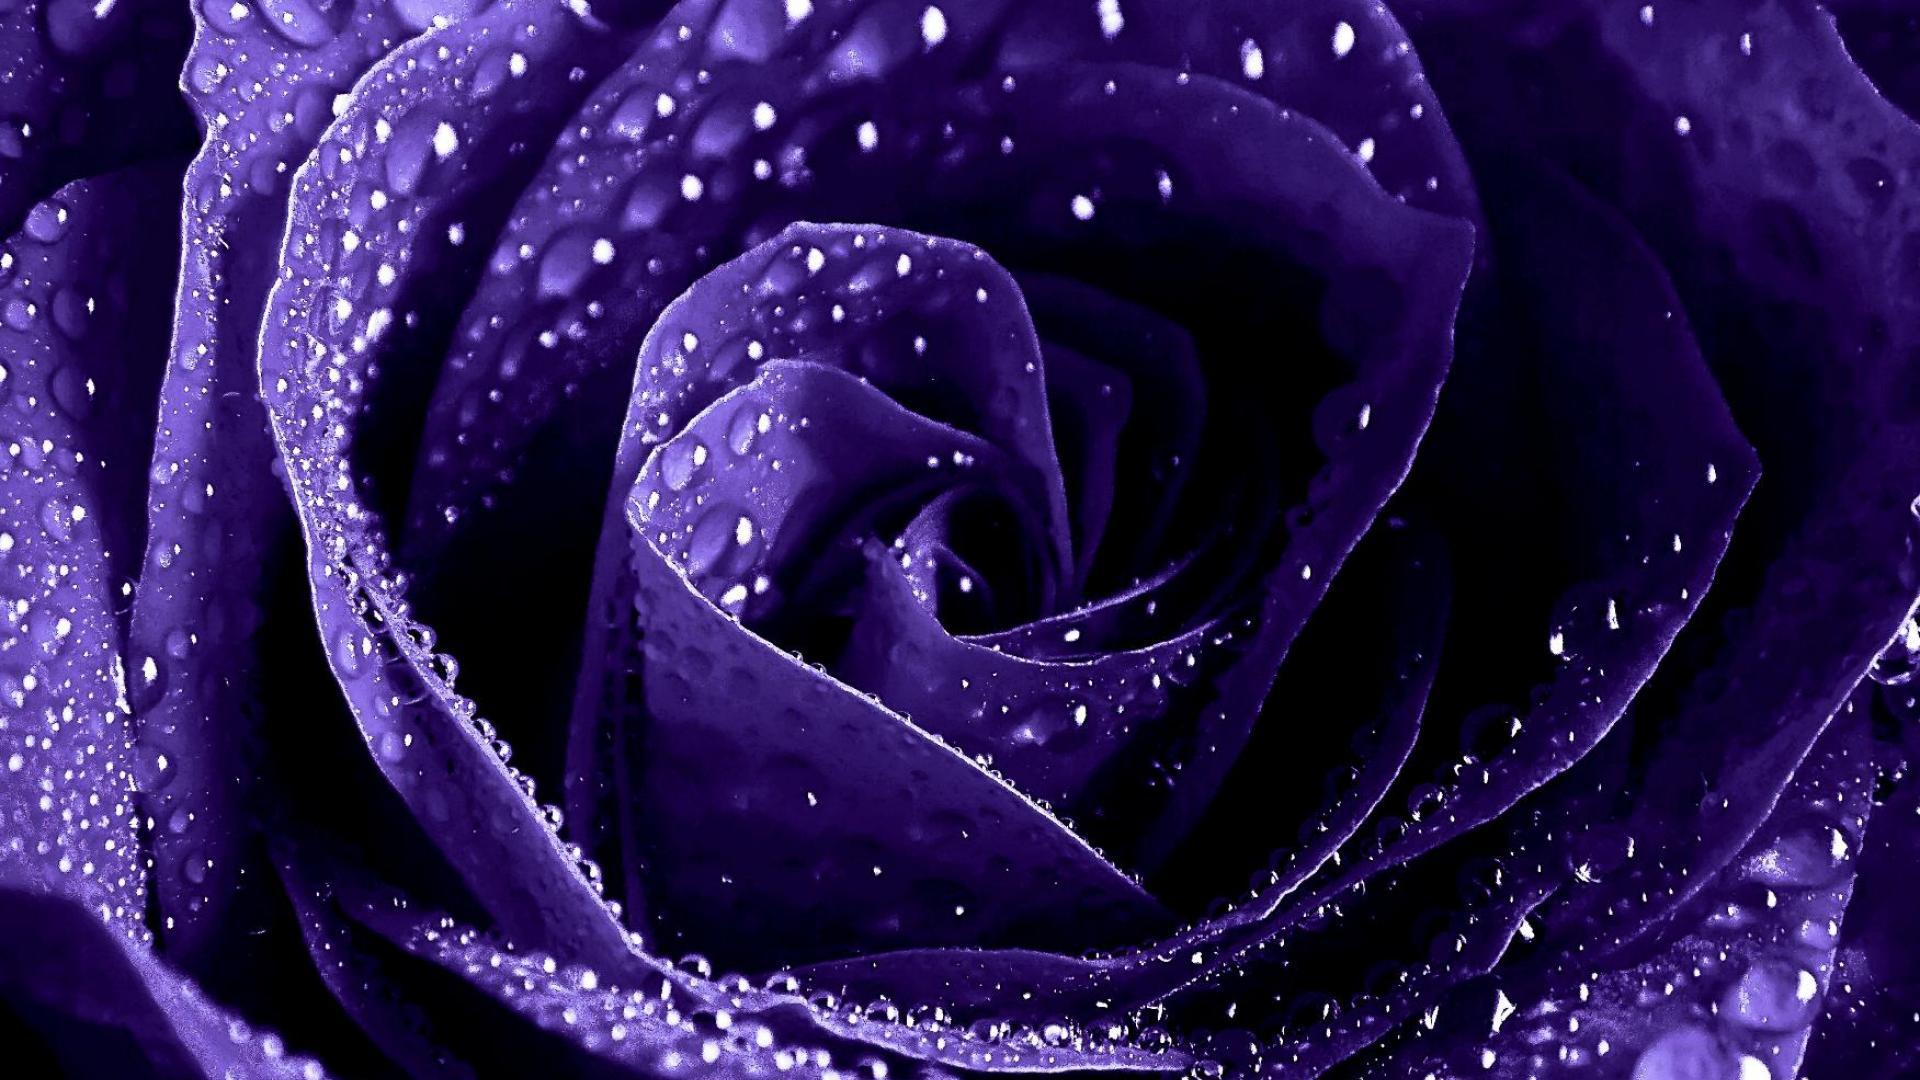 Purple Roses Wallpaper High Definition